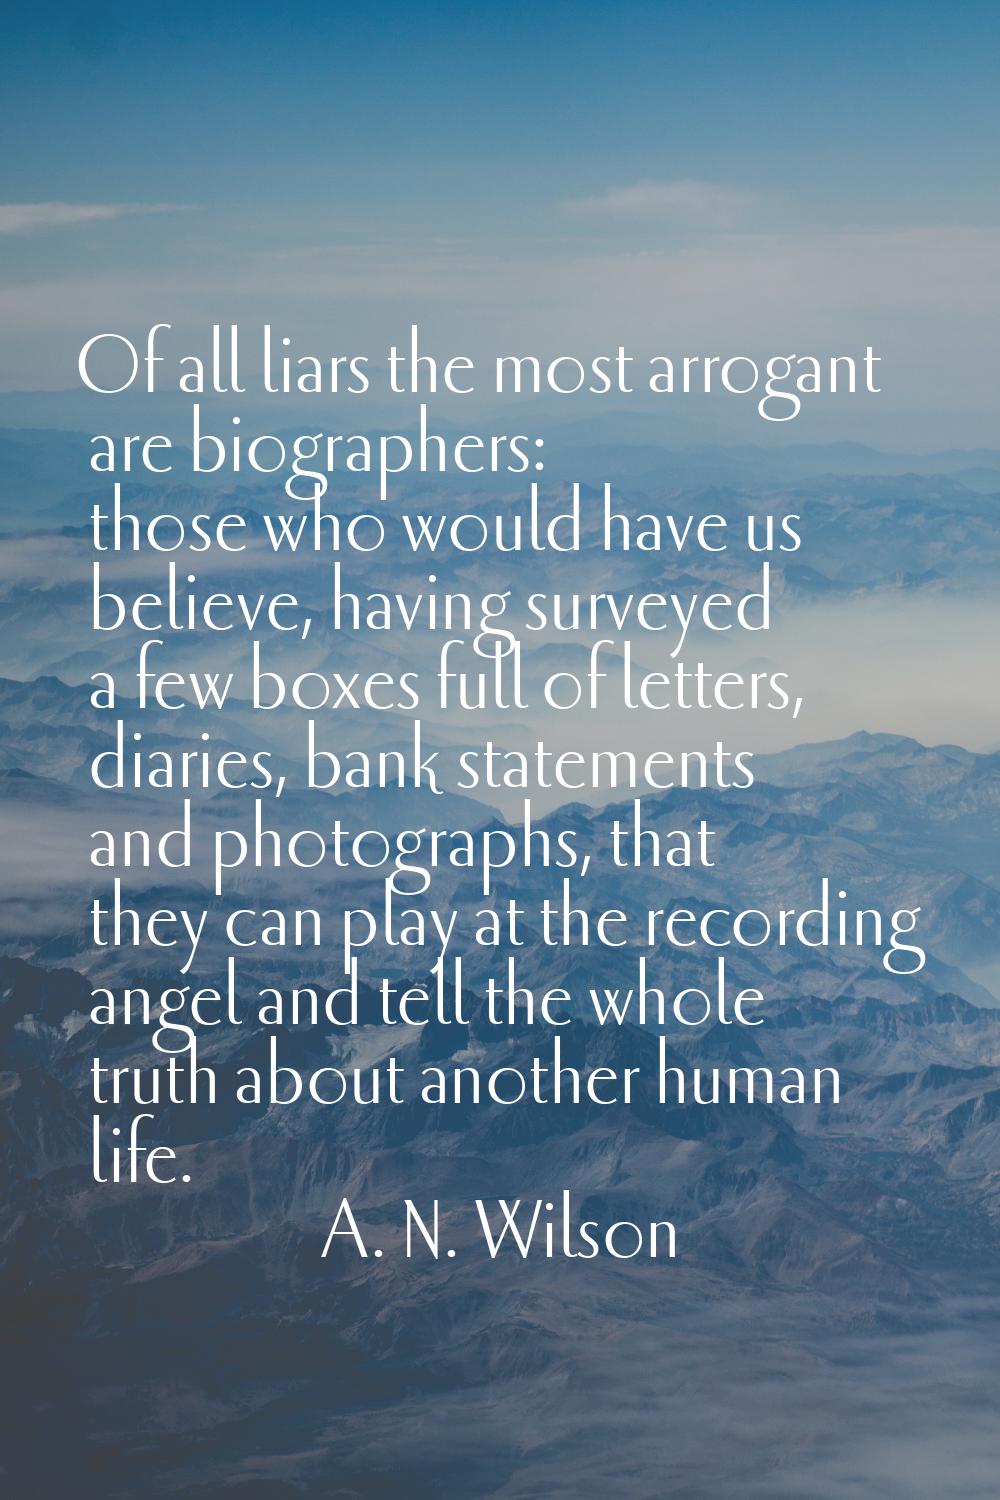 Of all liars the most arrogant are biographers: those who would have us believe, having surveyed a 